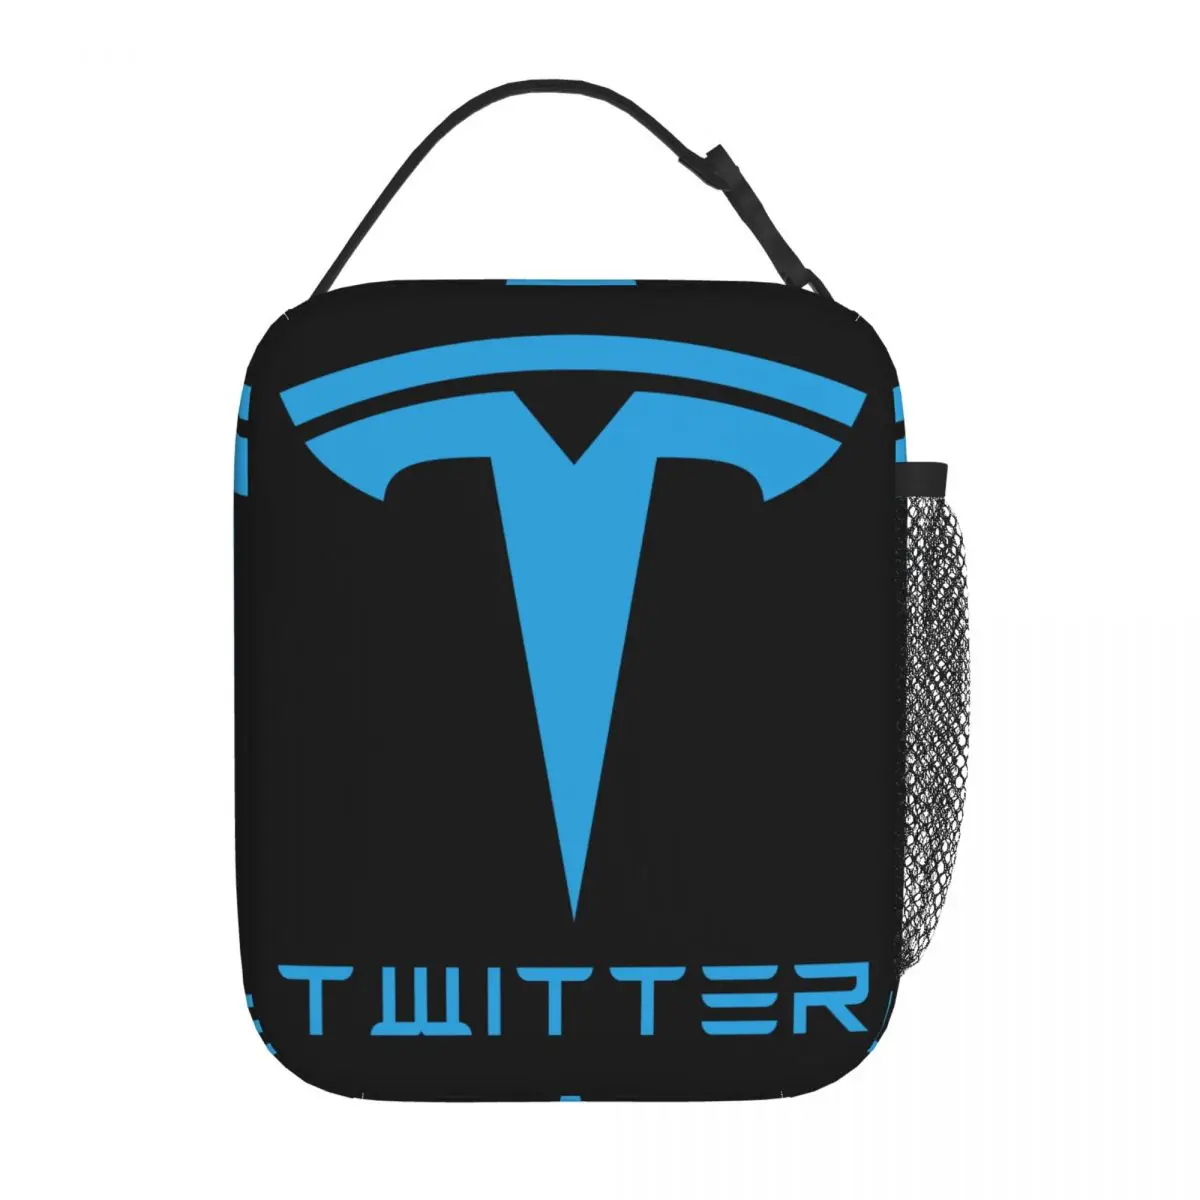 Insulated Lunch Tote Bag Tesla Twitter Logo Accessories Storage Food Box Unique Design Cooler Thermal Lunch Box For School